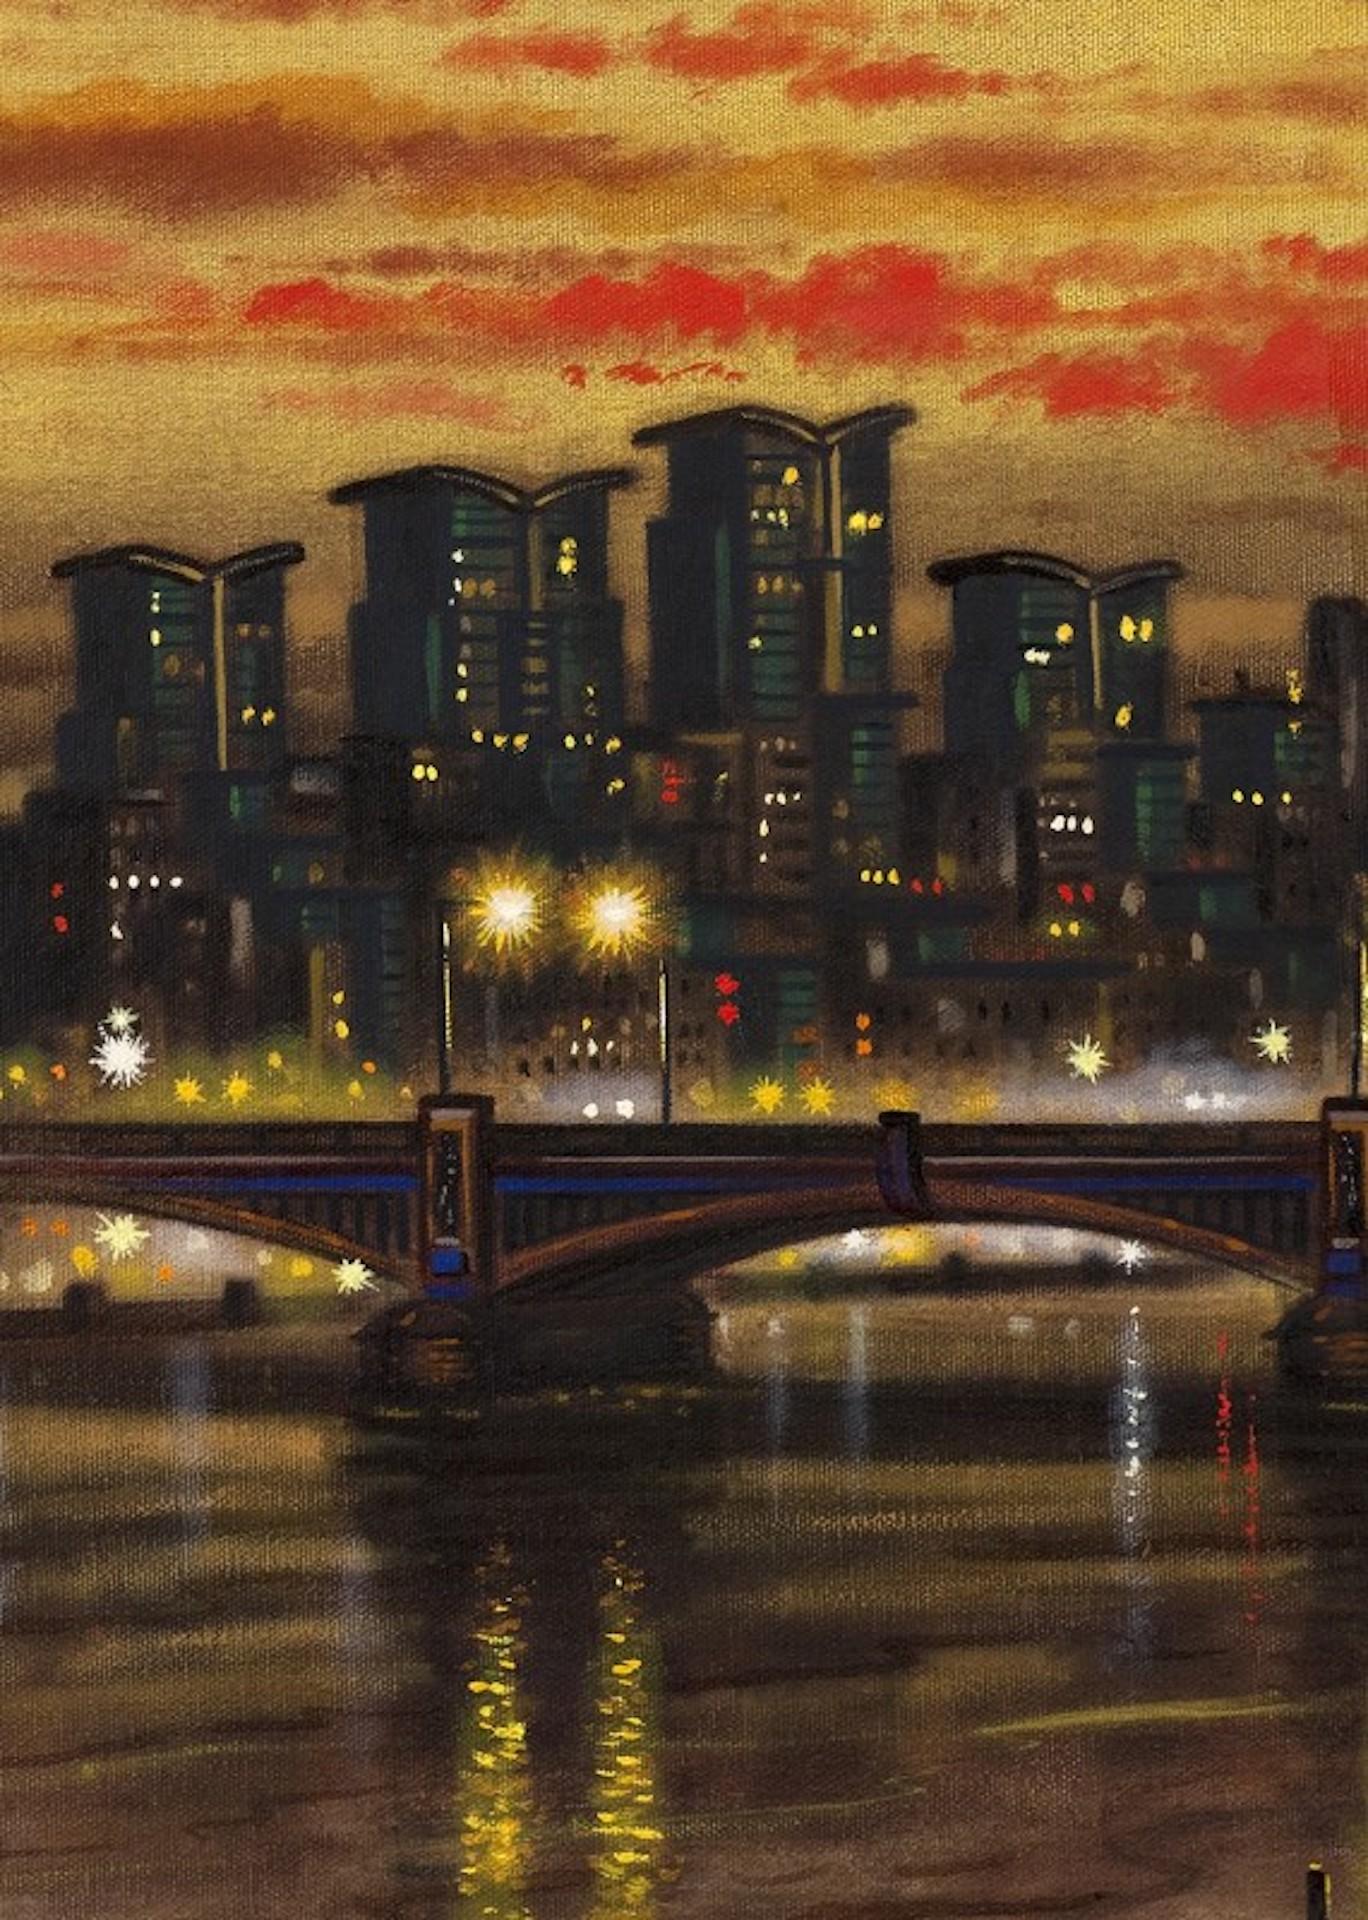 Vauxhall Bridge [2014]
Original
Landscape
Oil Paint on Canvas
Complete Size of Unframed Work: H:51 cm x W:76 cm x D:4cm
Sold Unframed
Please note that insitu images are purely an indication of how a piece may look

'Vauxhall Bridge' is an original